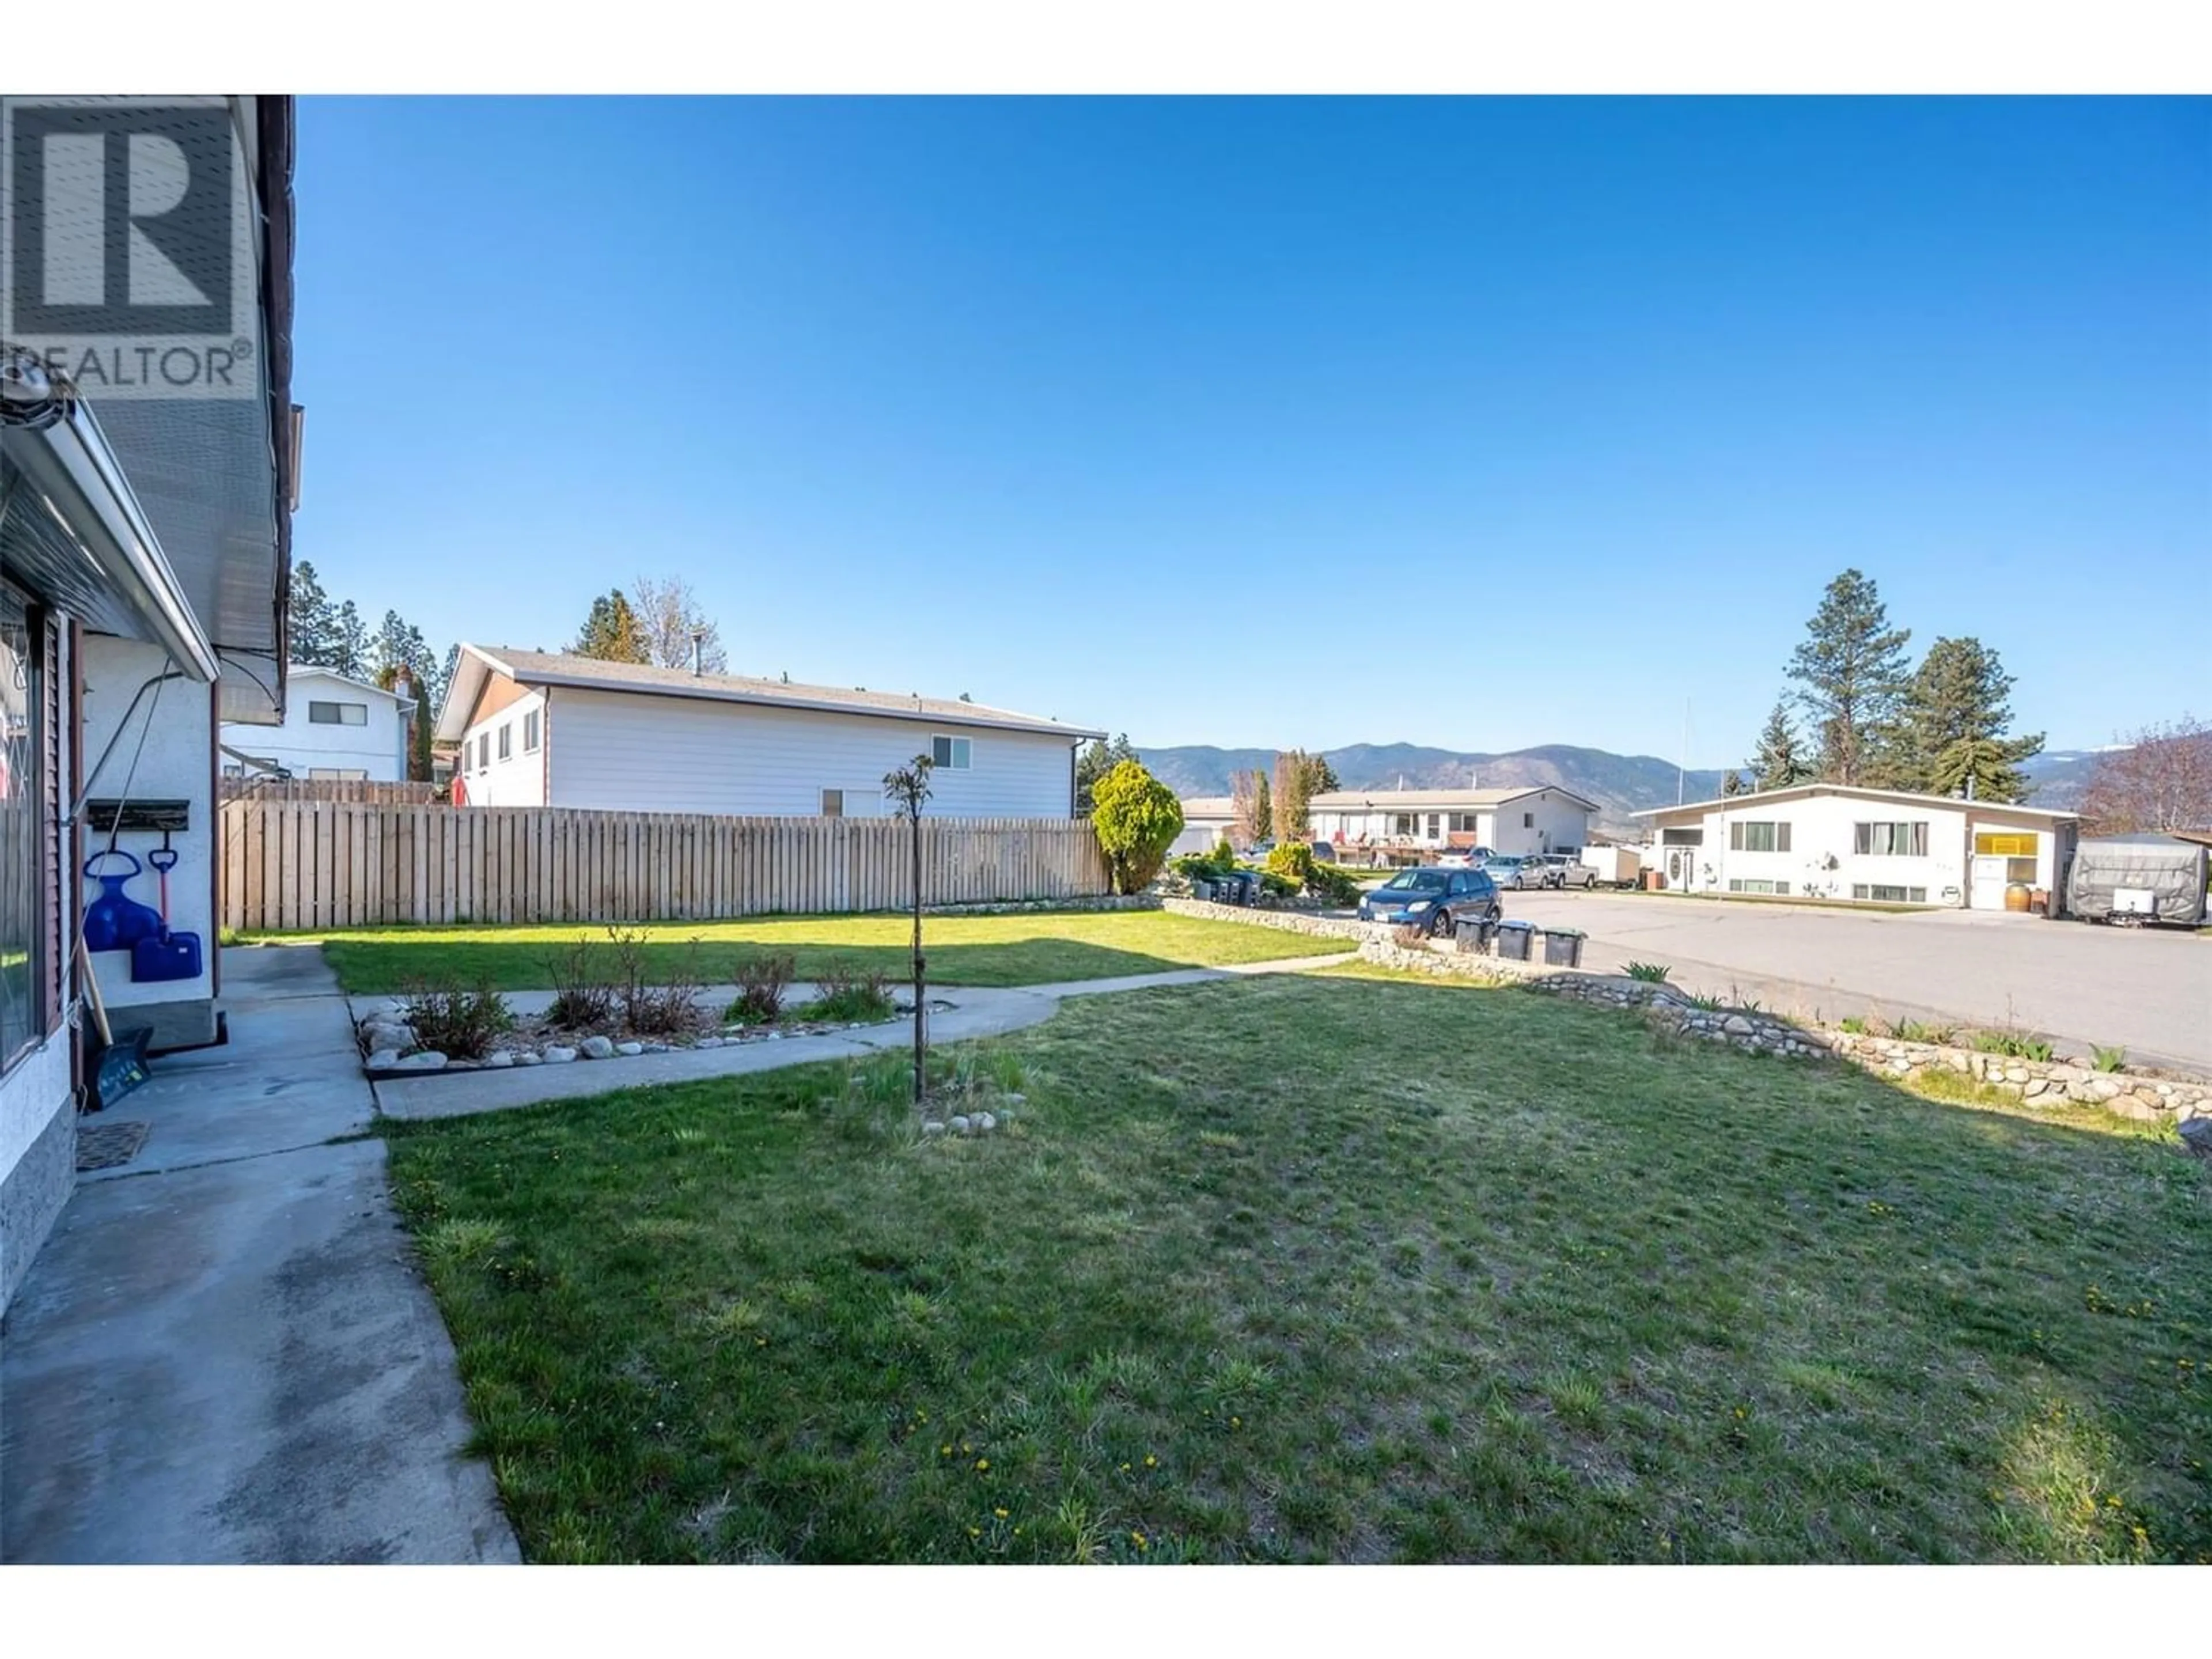 Fenced yard for 122&124 HIGHLAND Place, Penticton British Columbia V2A6M6